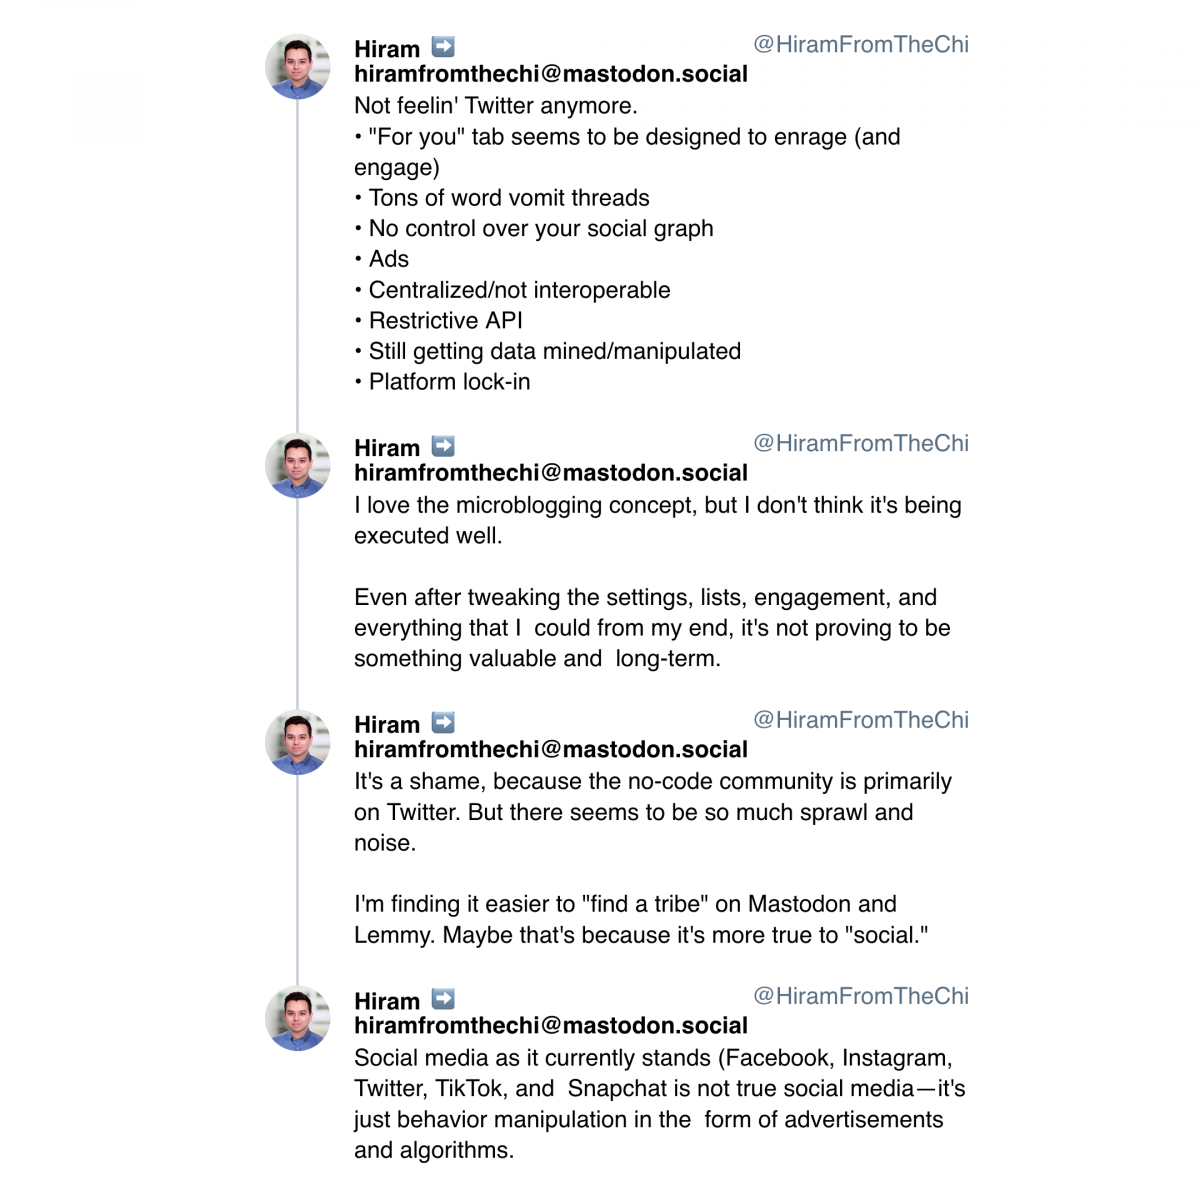 Screenshot of a thread by HiramFromTheChi describing the changes that have led to Twitter's/X's downward spiral.